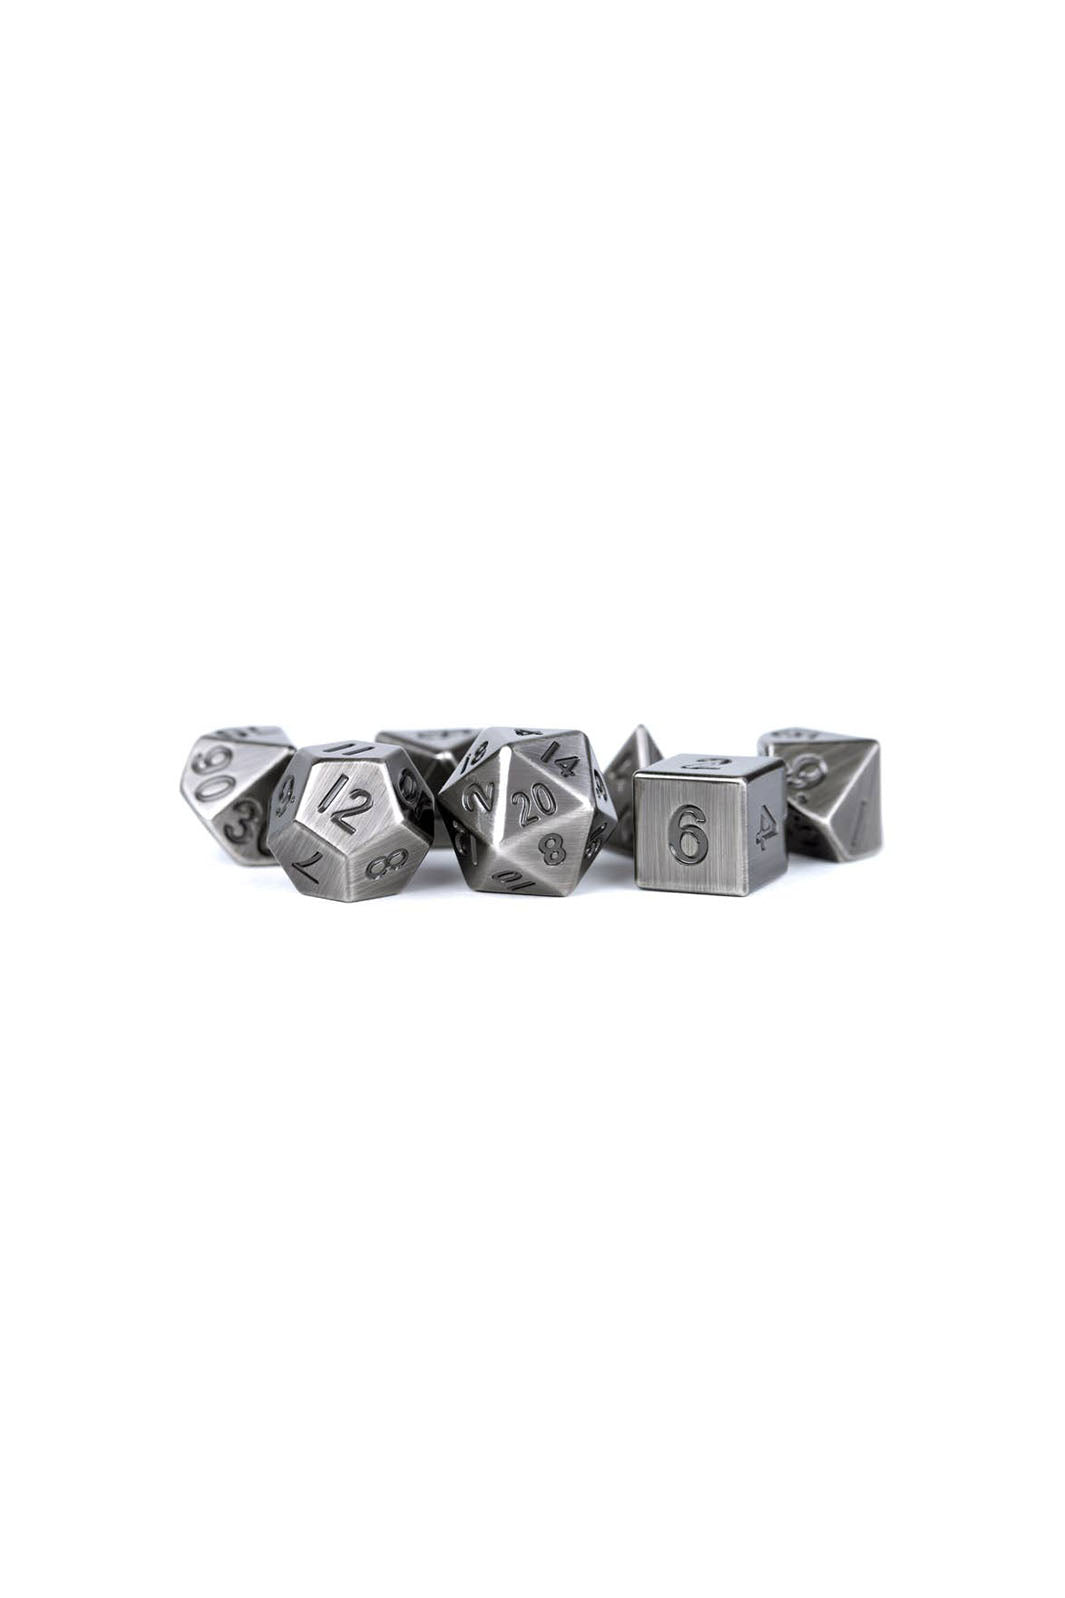 16mm Metal Polyhedral Dice Set - Antique Silver